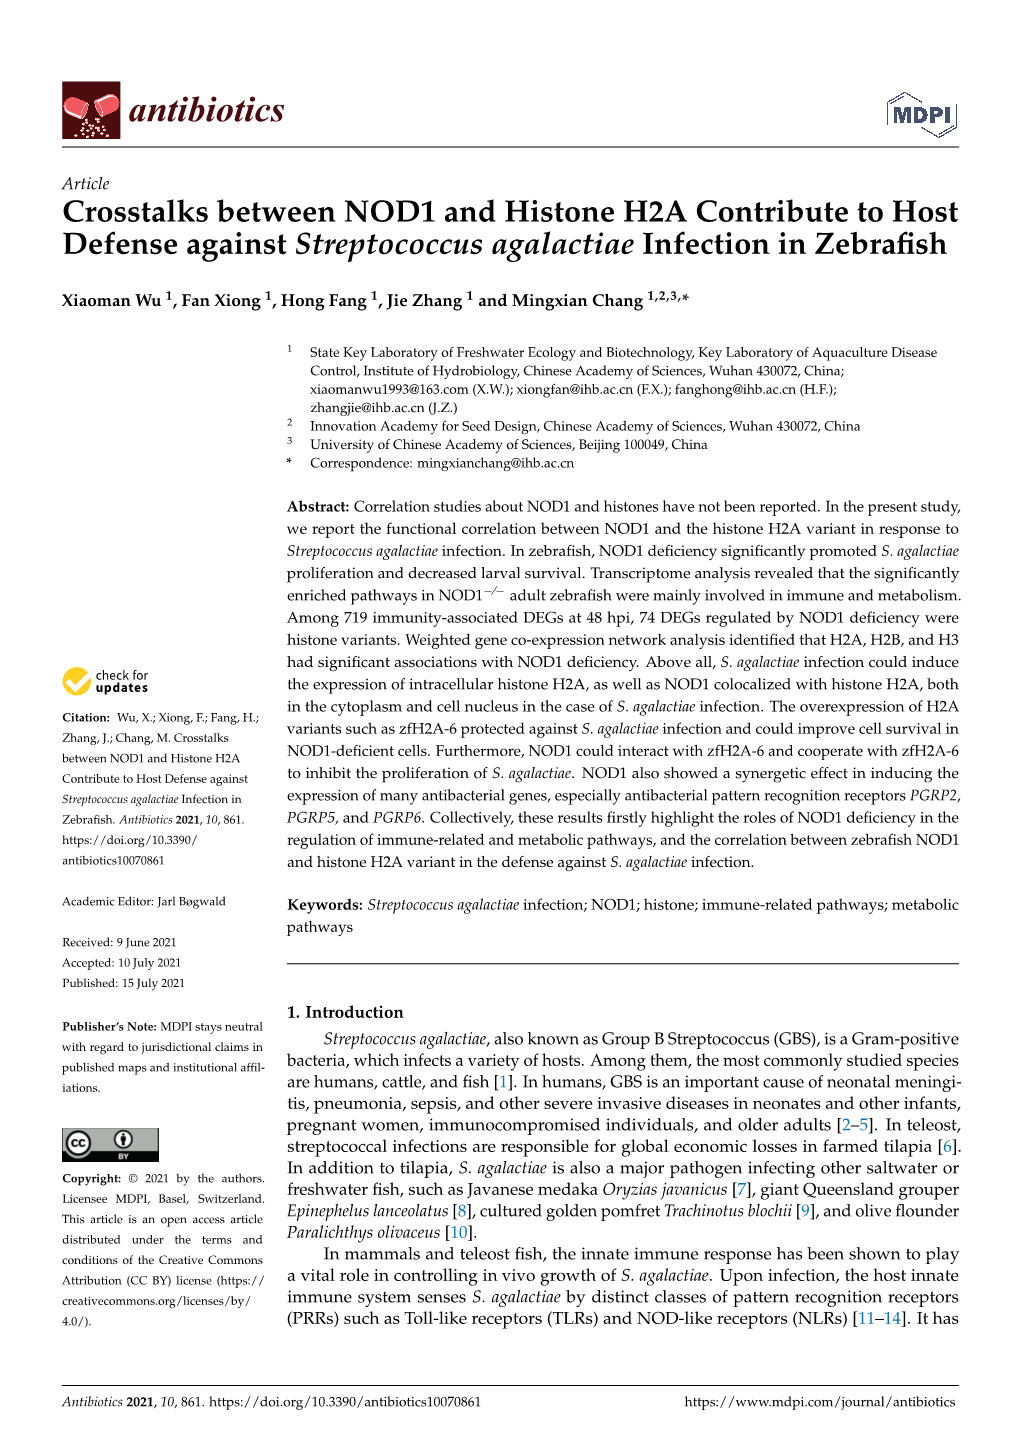 Crosstalks Between NOD1 and Histone H2A Contribute to Host Defense Against Streptococcus Agalactiae Infection in Zebrafish